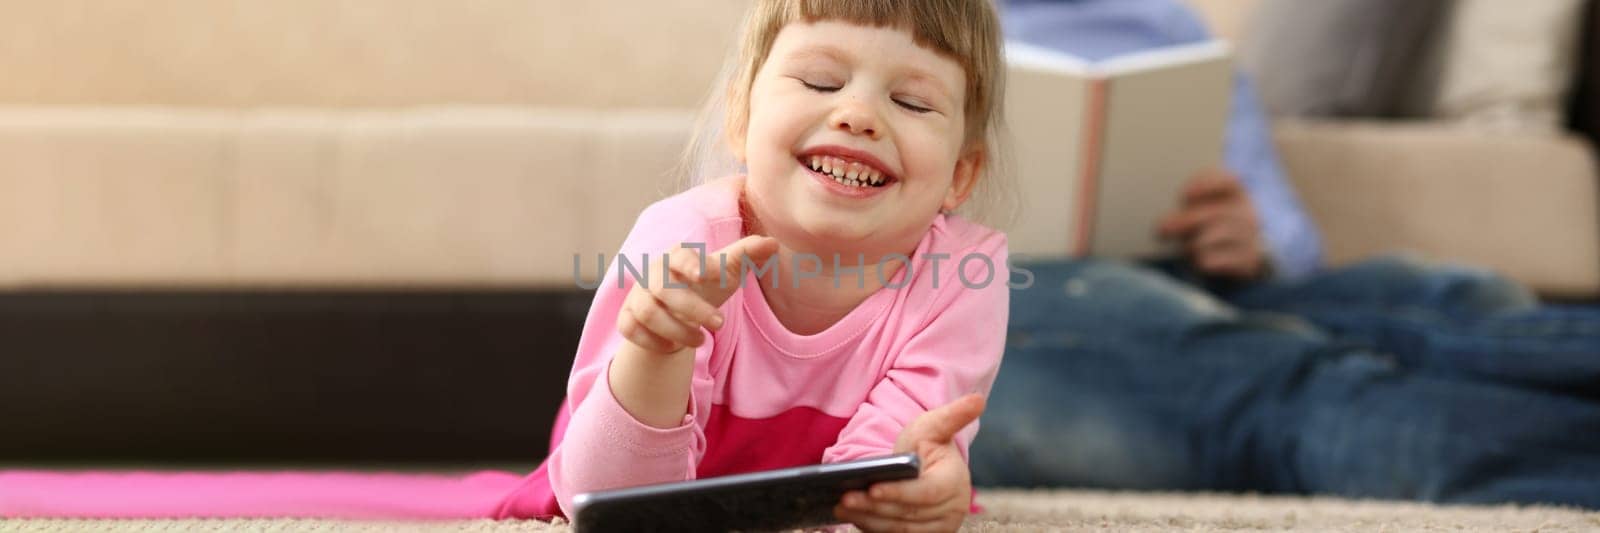 Little smiling baby girl with smartphone lies on floor in background dad reads a book. Children interests in phone and reading books